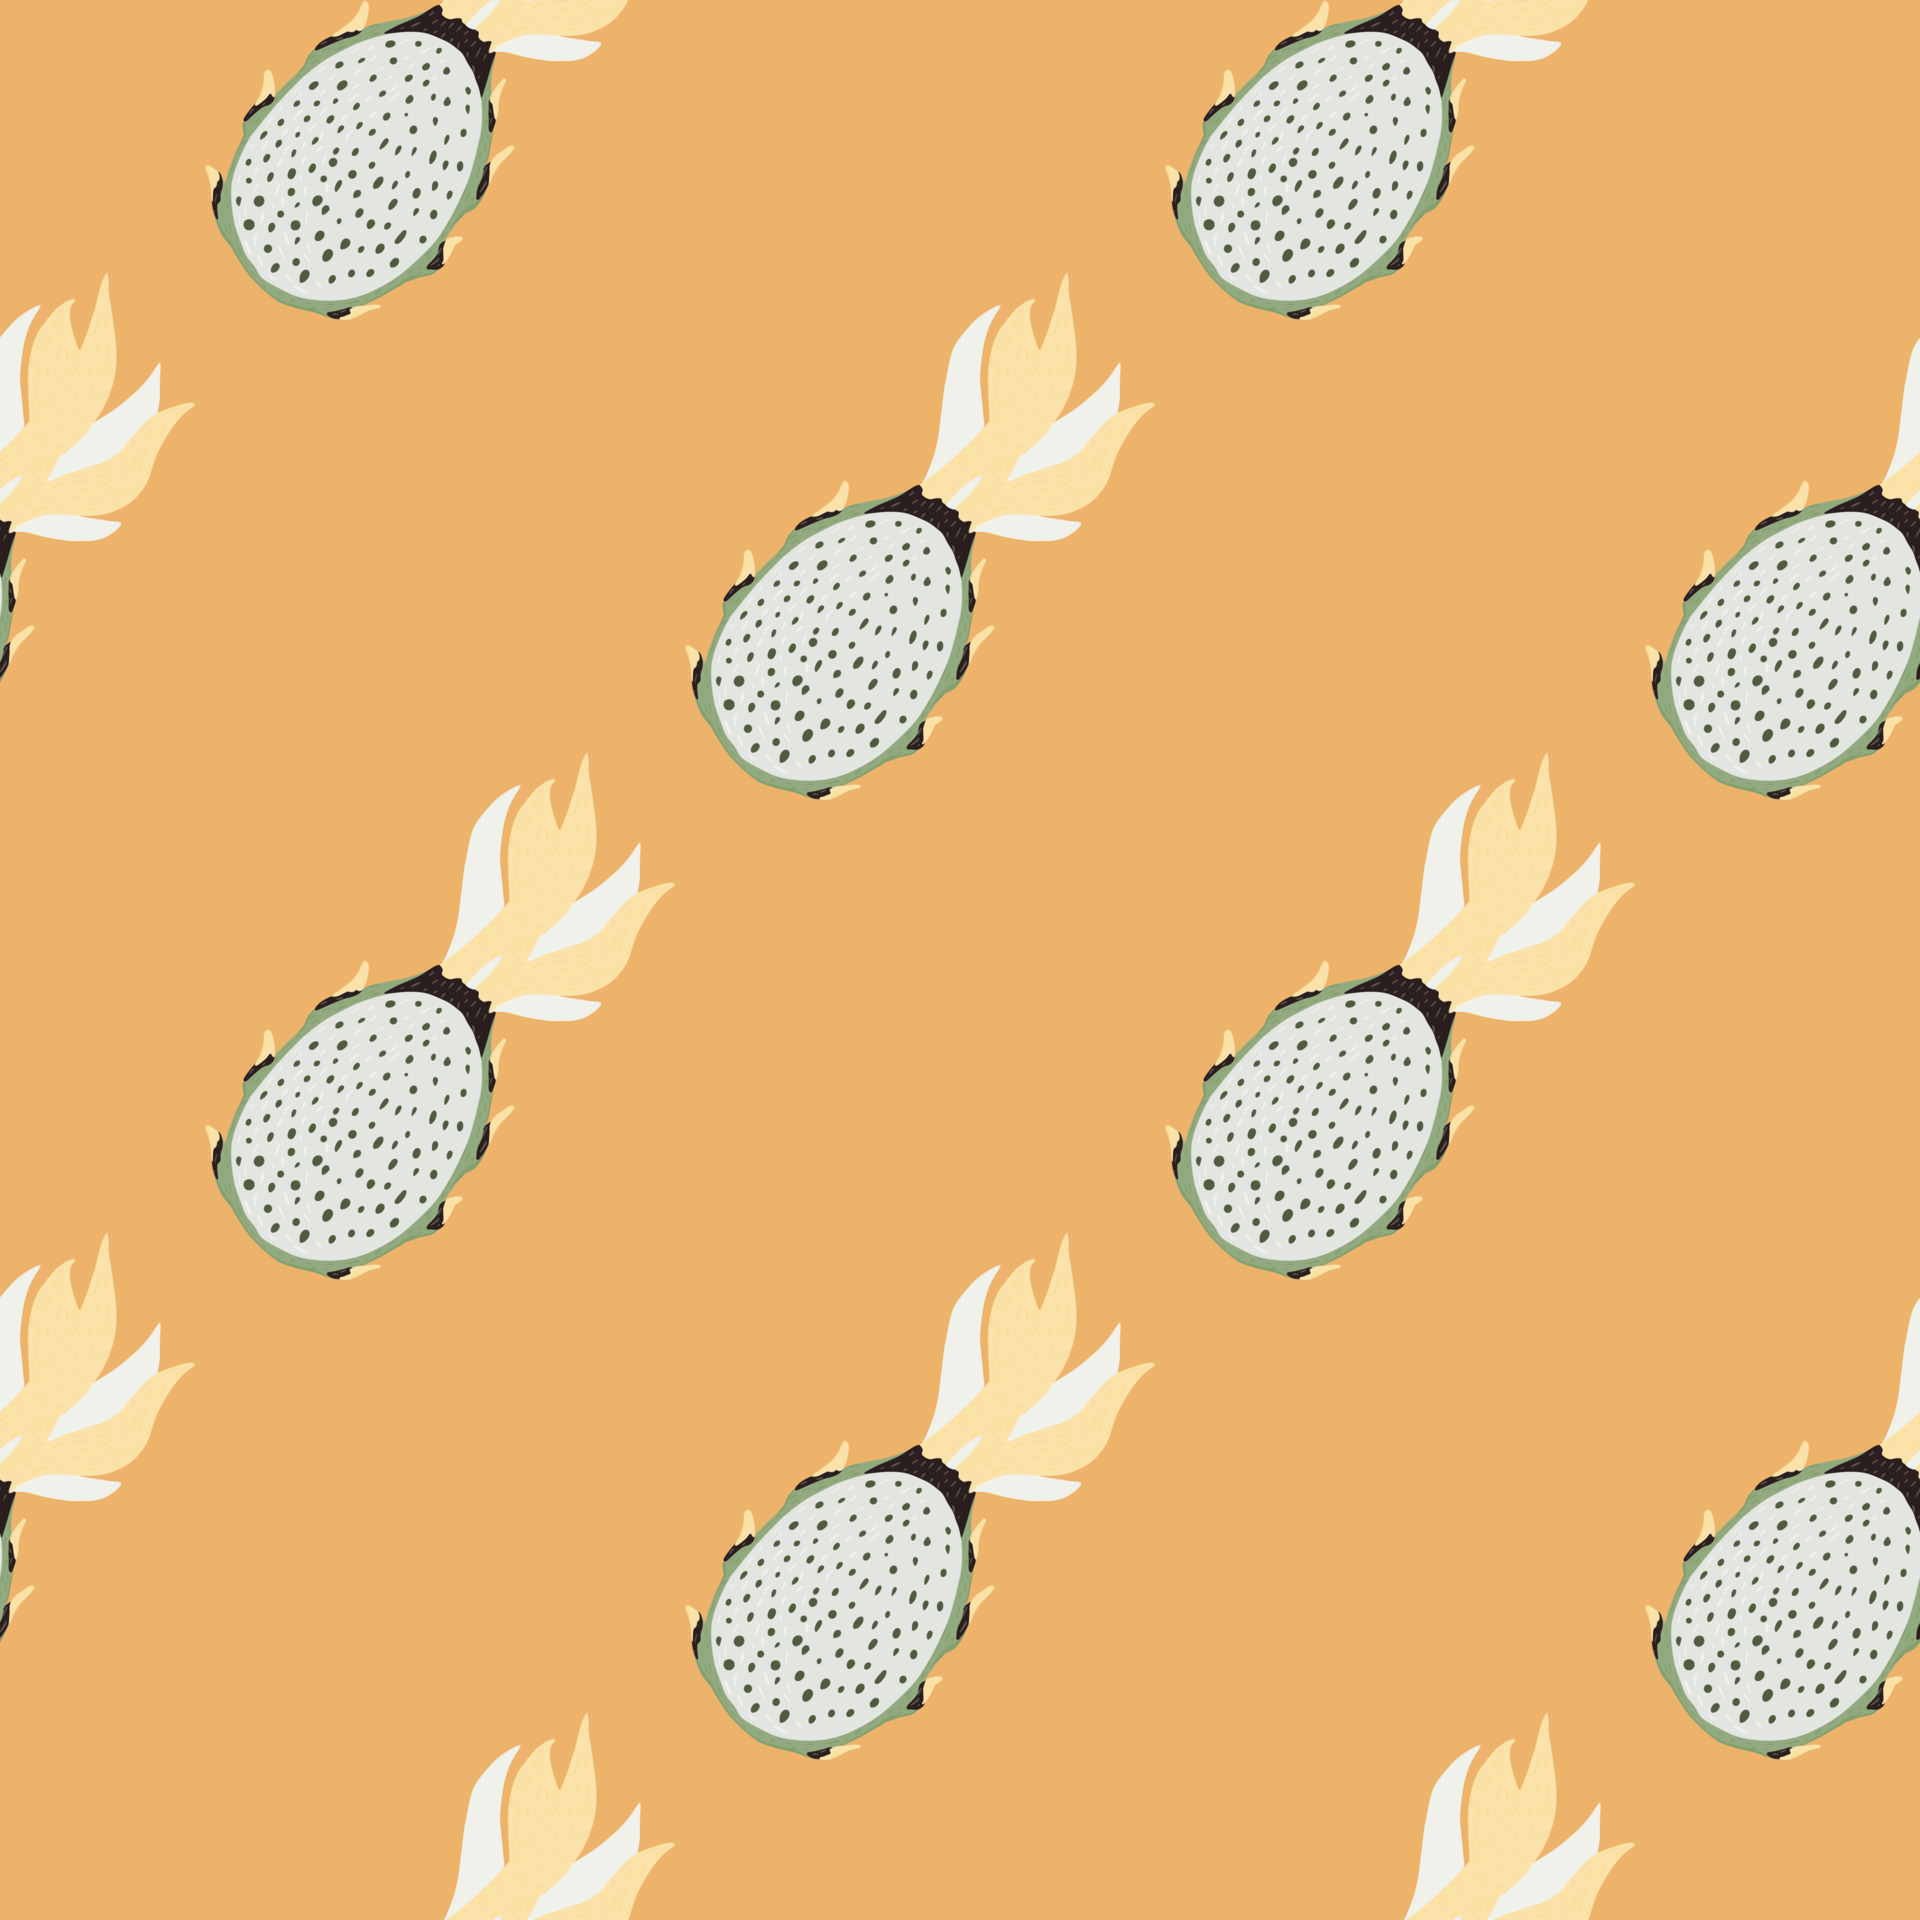 Healthy seamless food pattern with dragon fruit elements. Orange pastel background